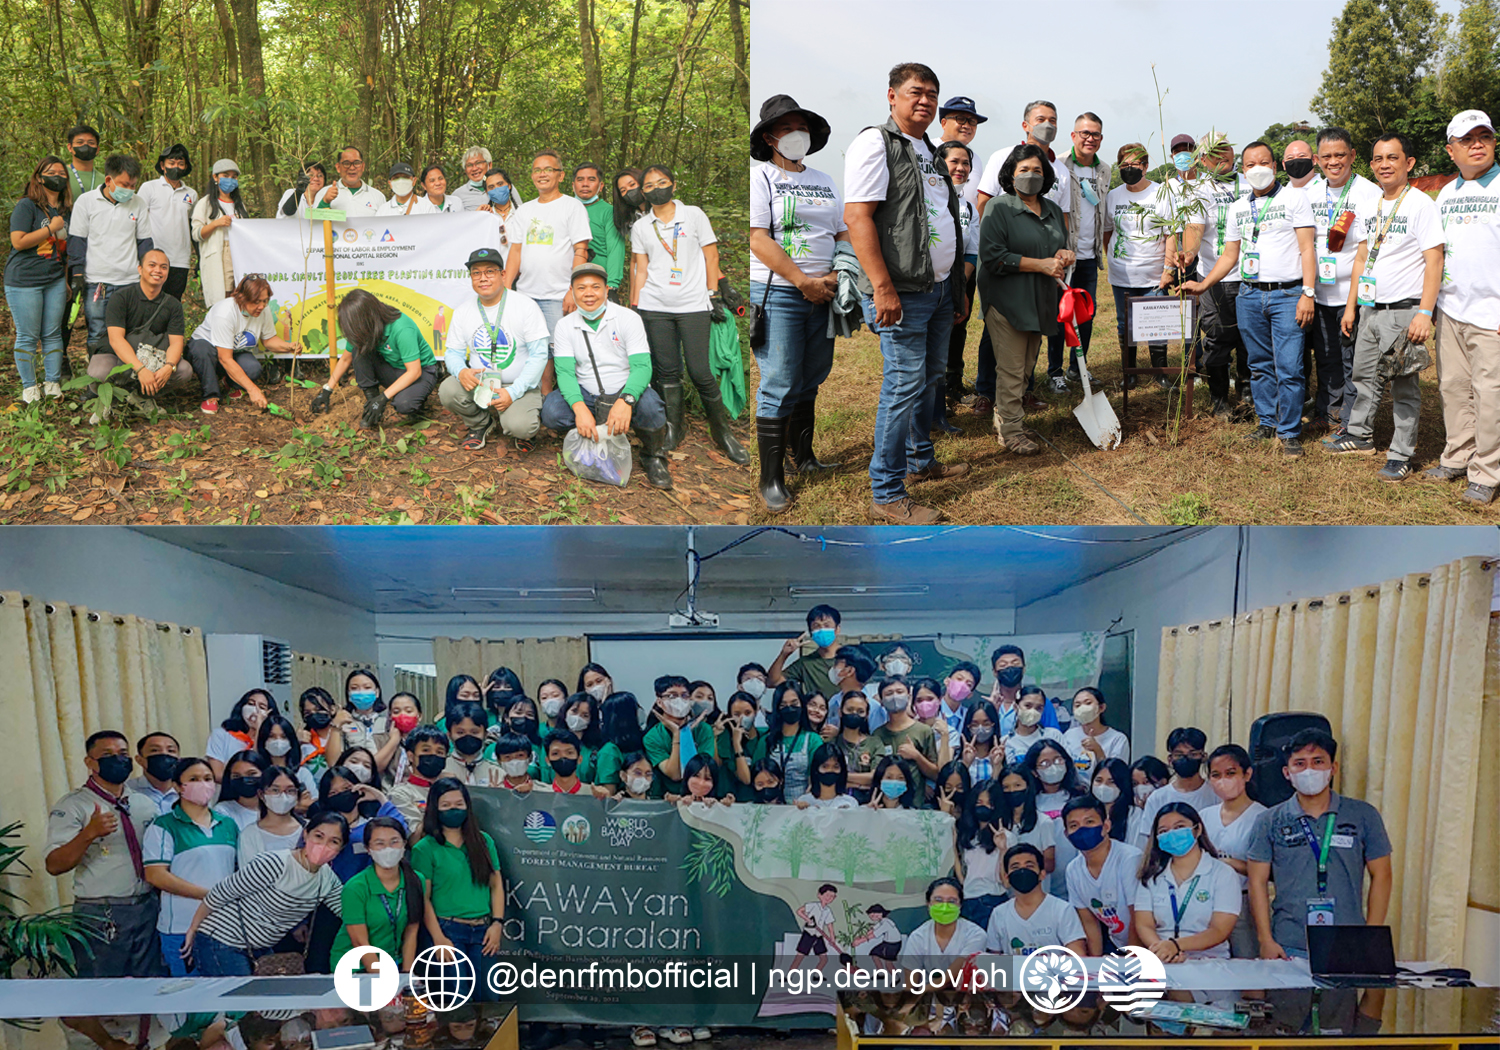 FMB CONDUCTS VARIOUS ACTIVITIES IN CELEBRATION OF PHILIPPINE BAMBOO MONTH